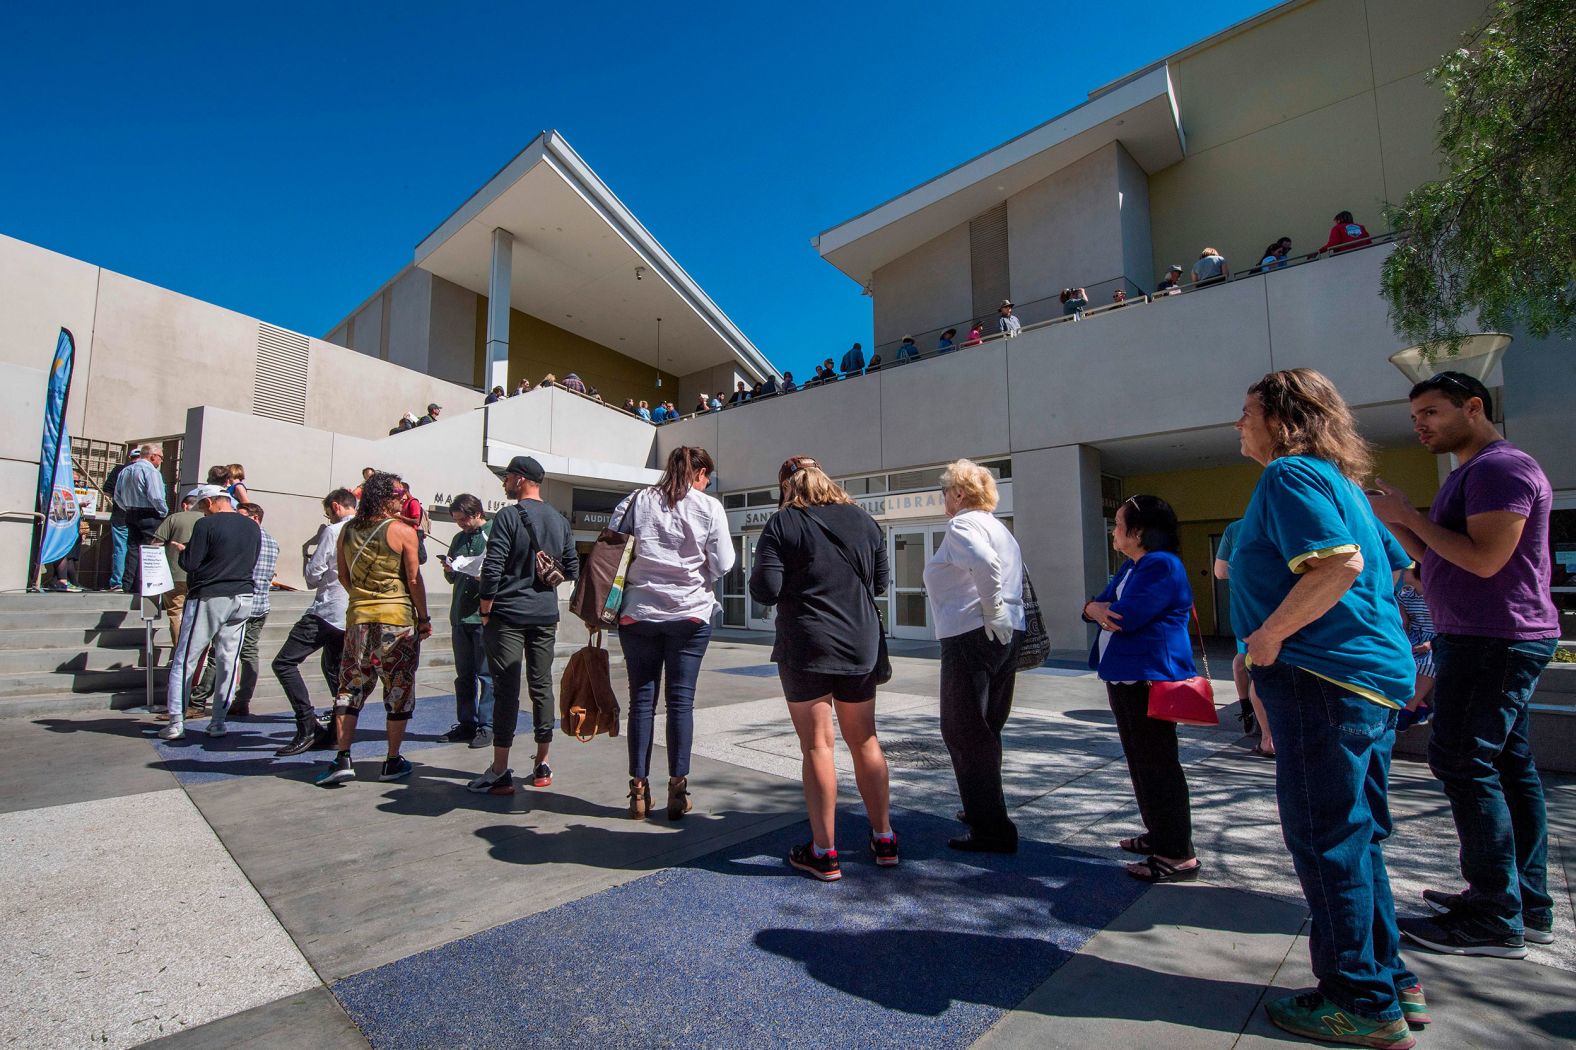 People wait to vote in Santa Monica, California. In Los Angeles County, voters were given additional time to cast their ballots for candidates. Voters across the area reported long lines at polling centers.